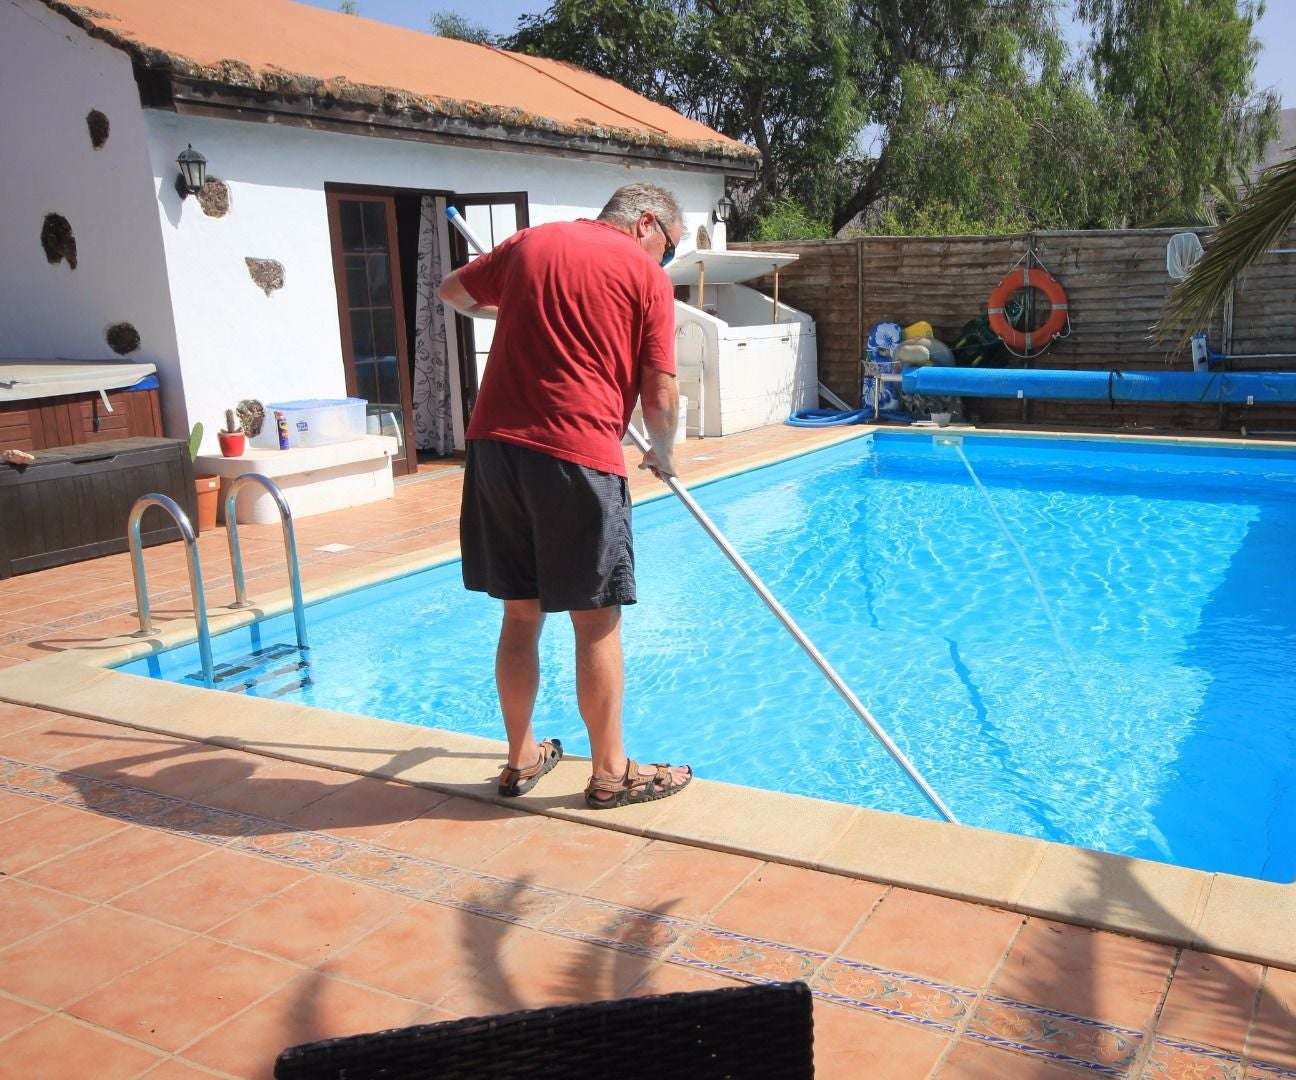 How to Clean a Swimming Pool